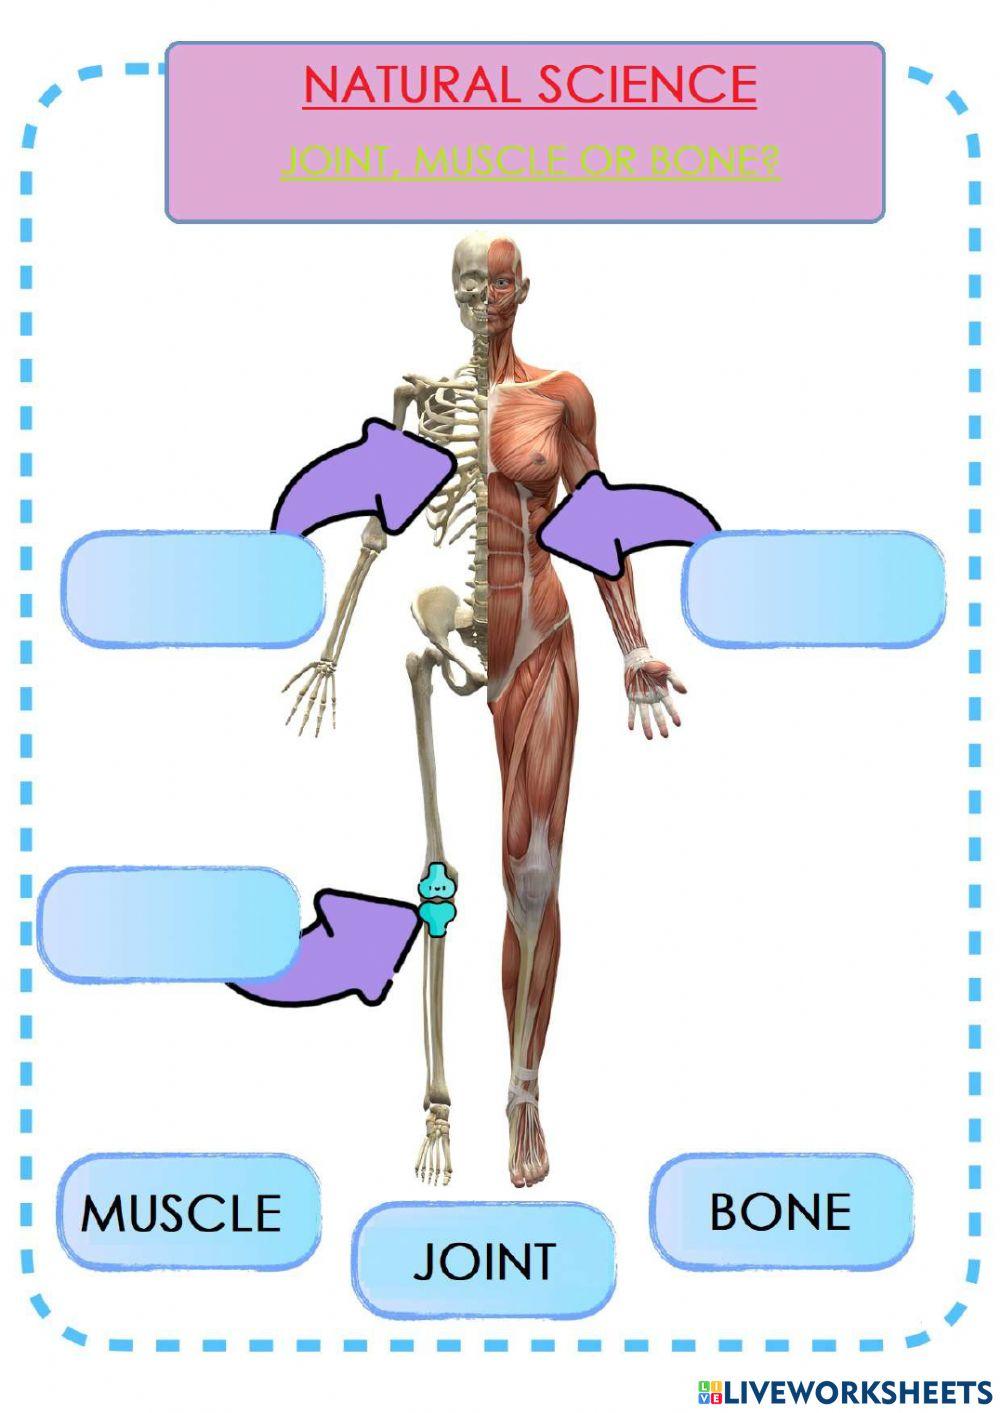 Joints, muscles or bones?